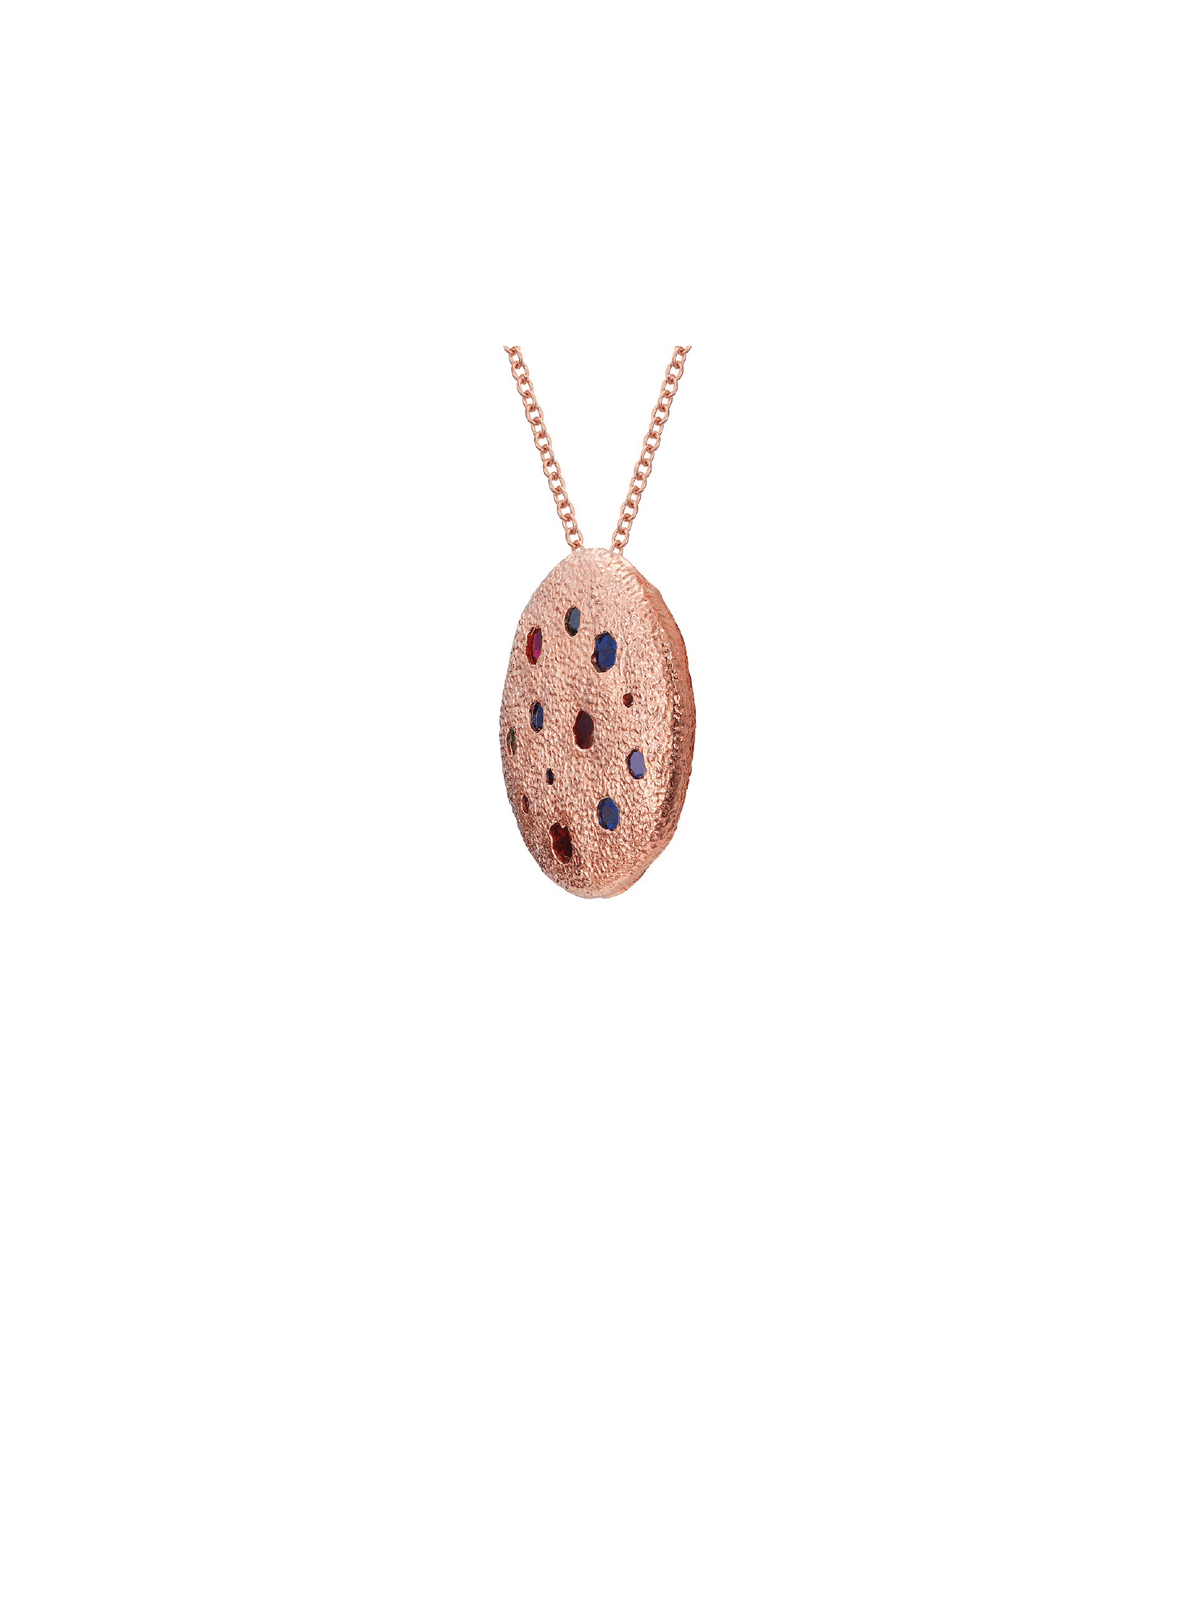 Honour Multiple Style Pendant - Small (Rose Gold)